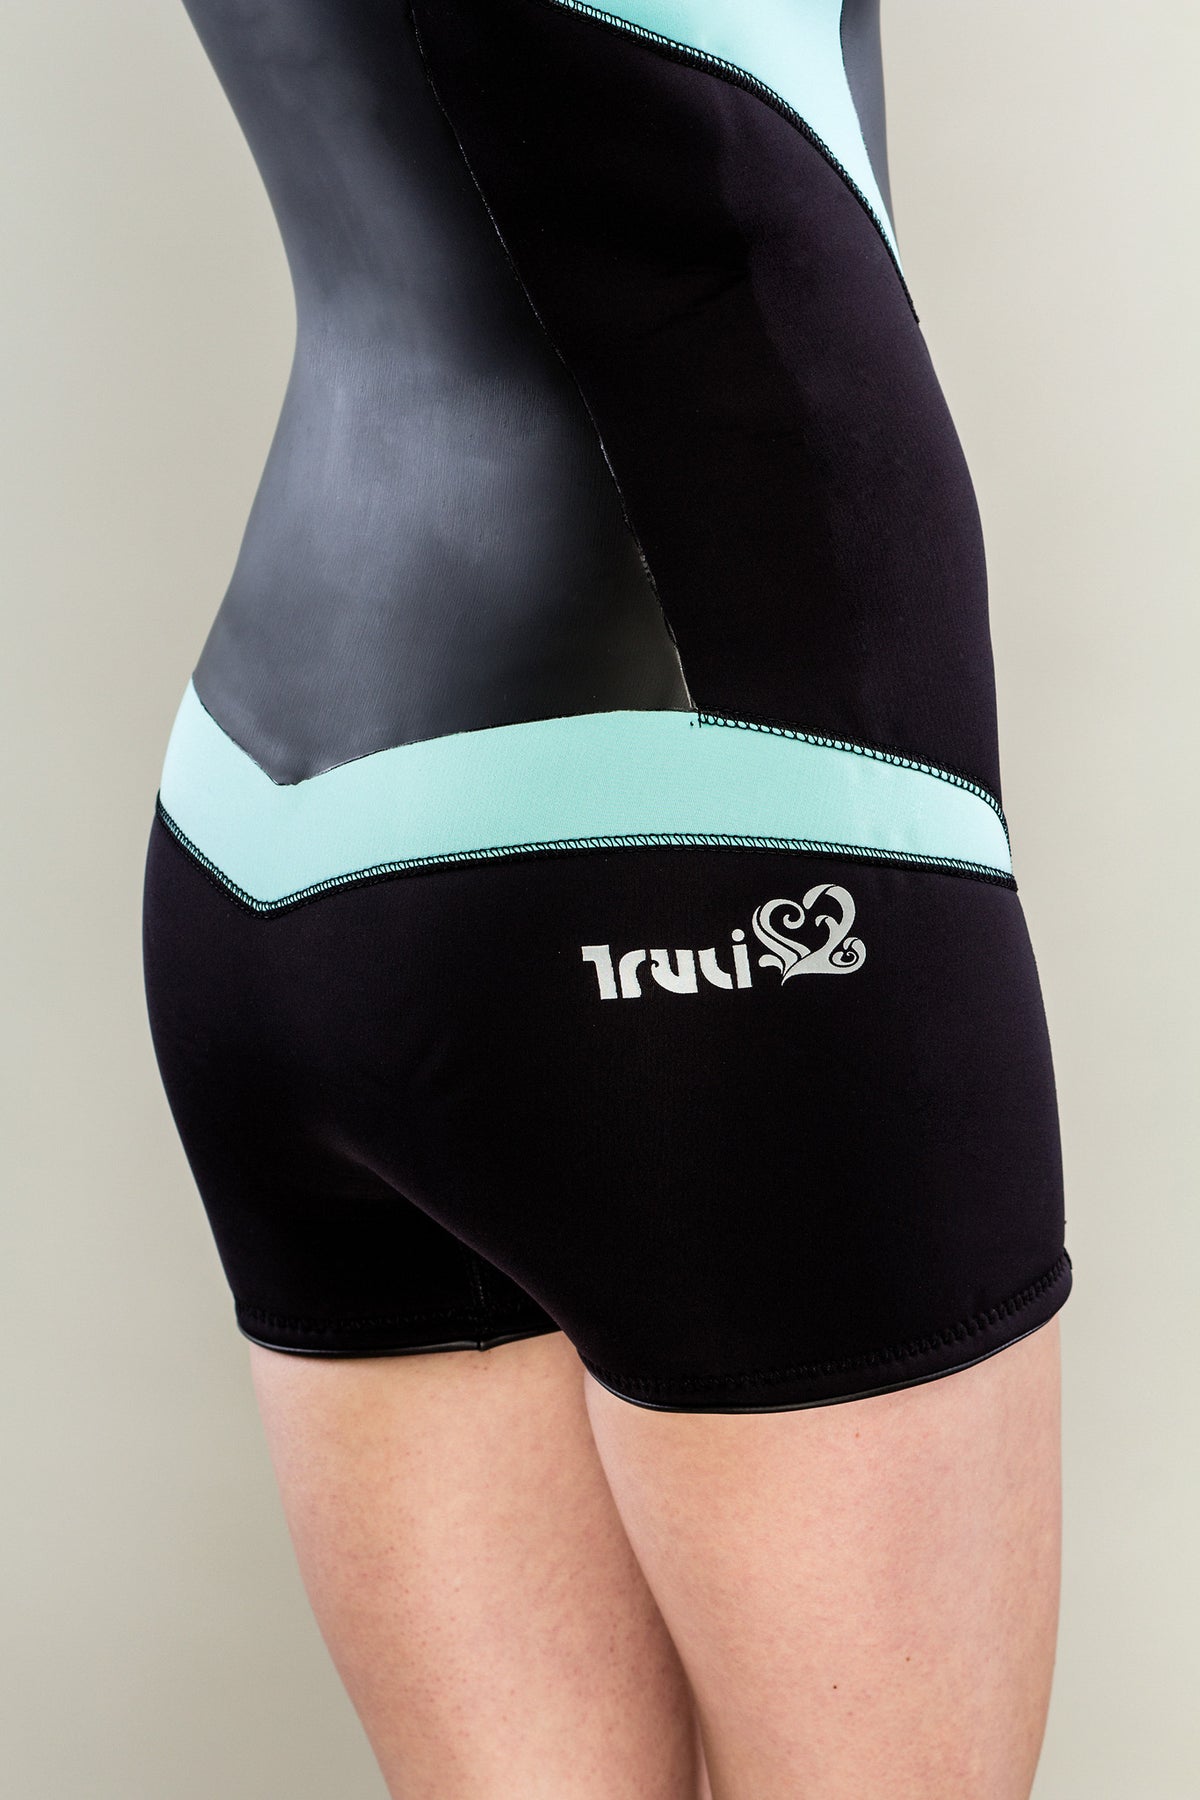 Truli Wetsuits is experimenting with a new design - The Truli-Capri!